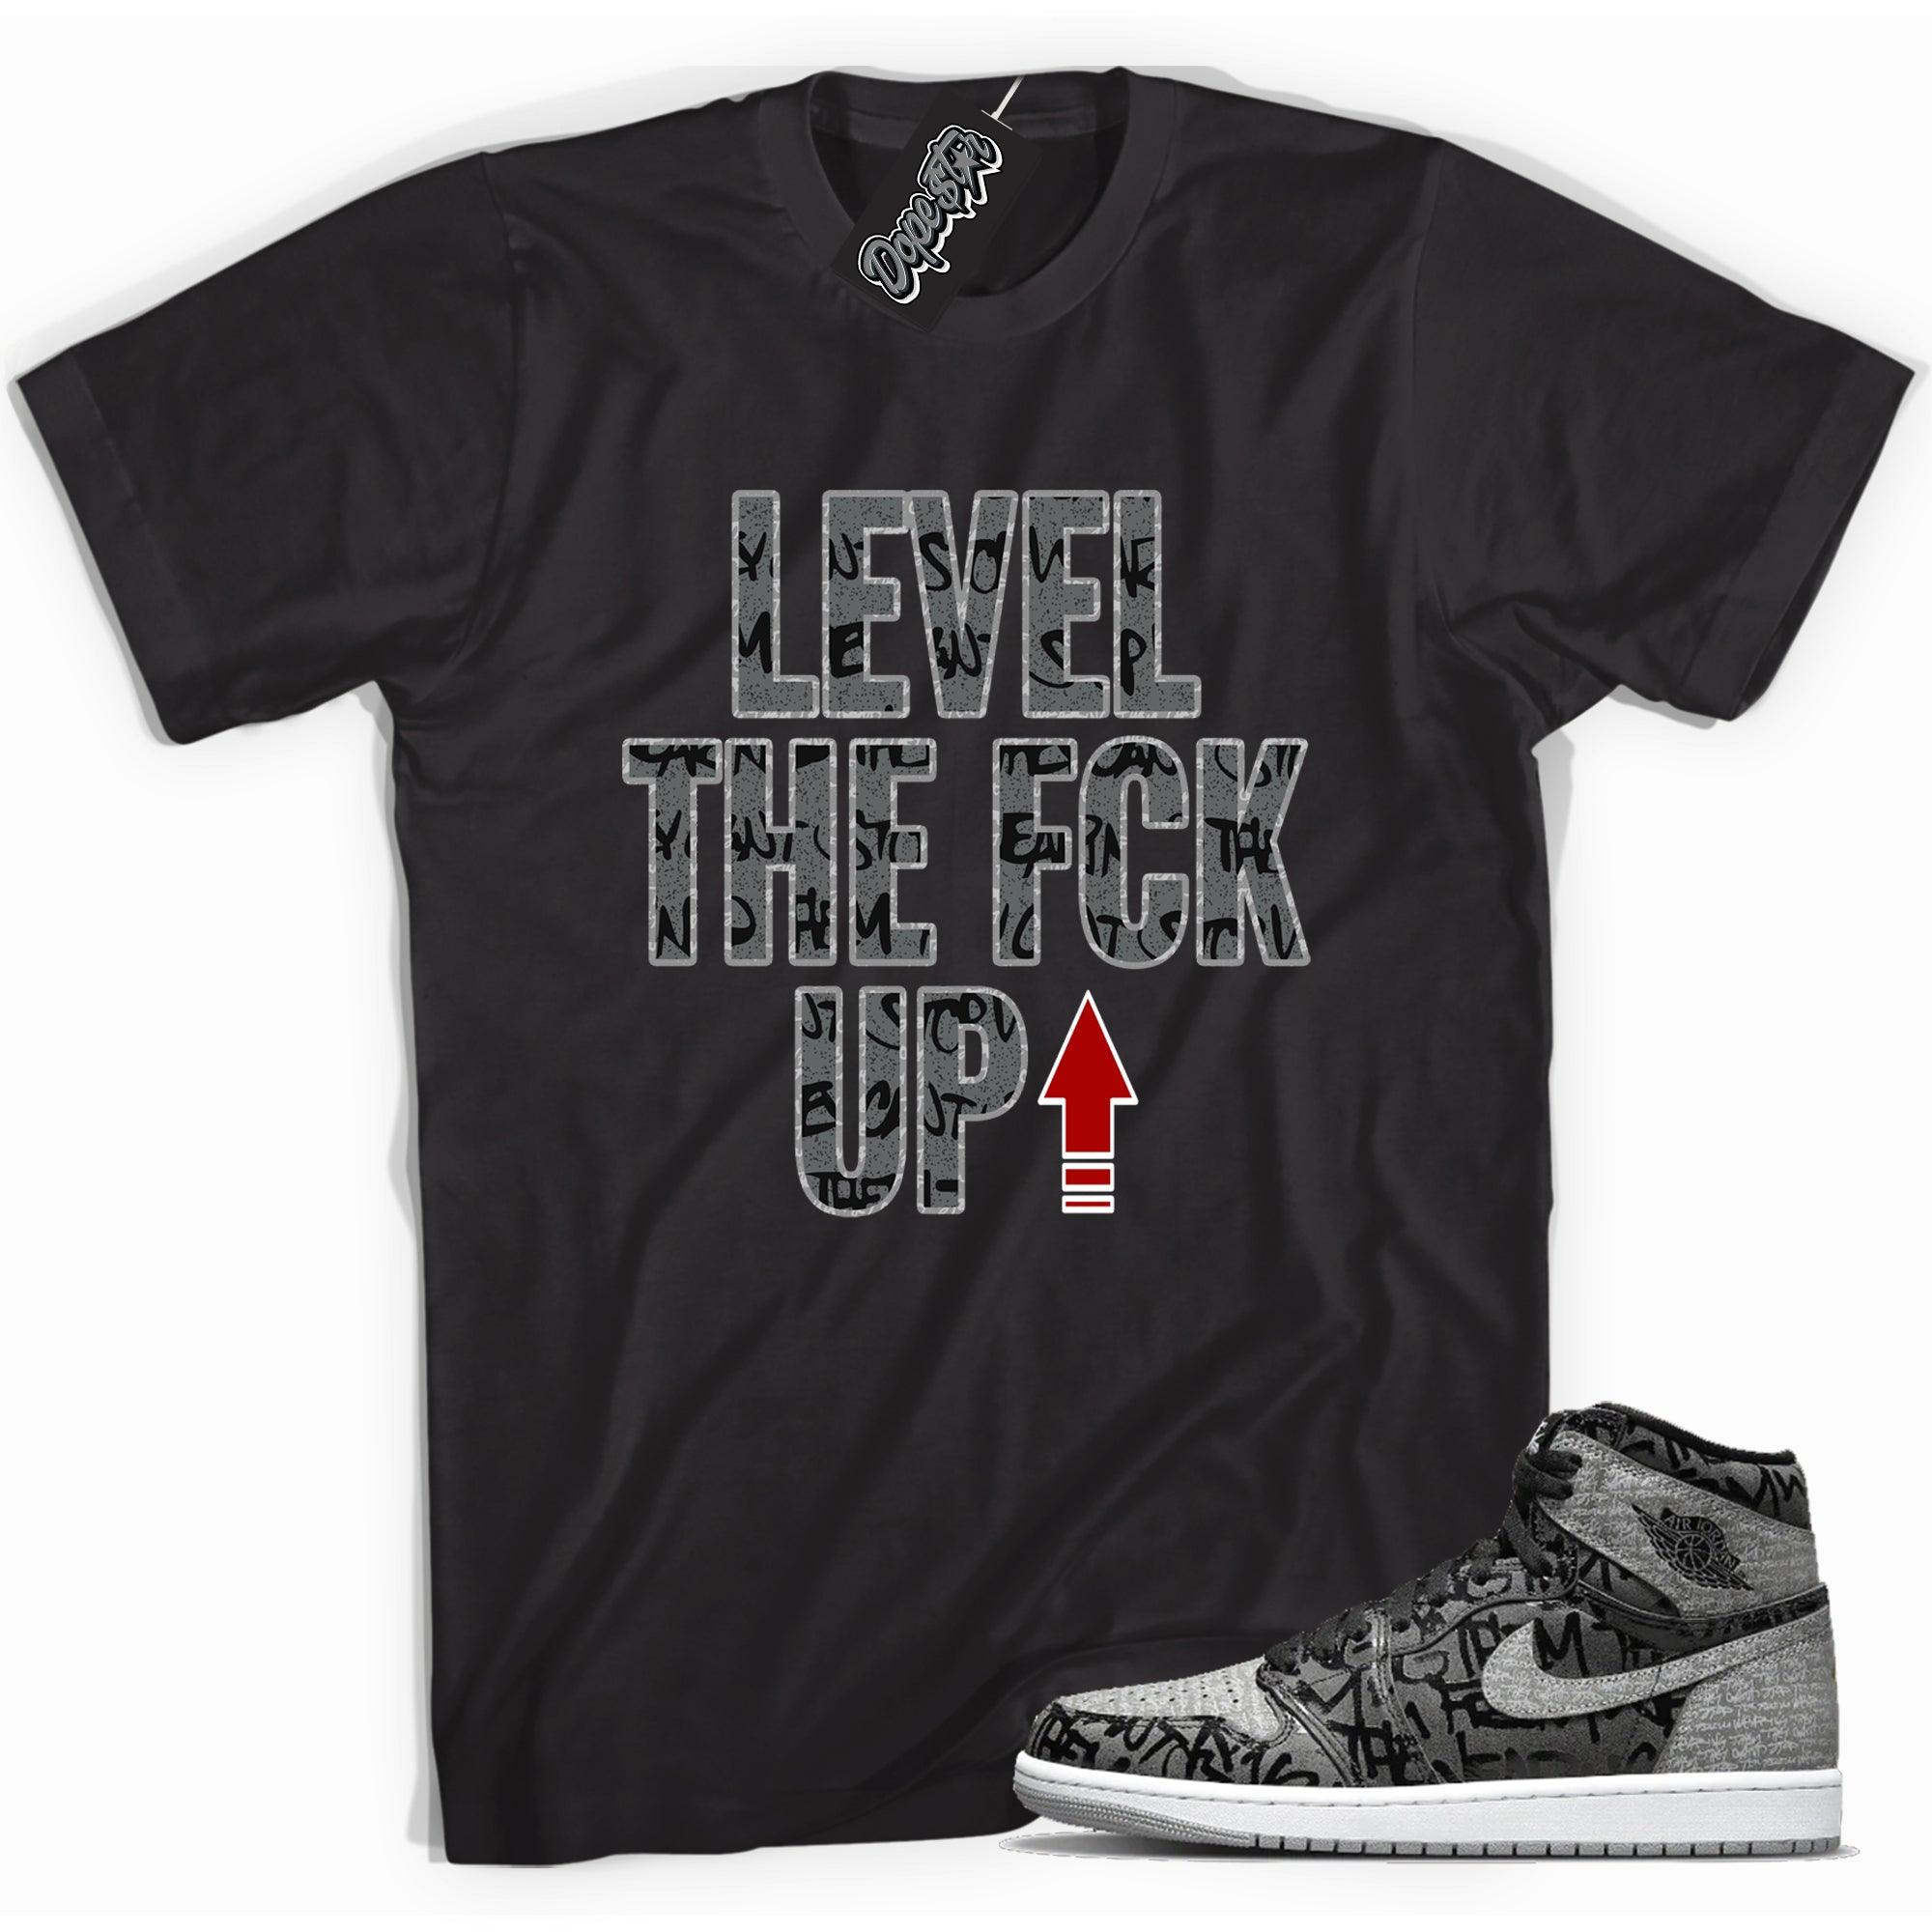 Cool black graphic tee with 'level up' print, that perfectly matches Air Jordan 1 High OG Rebellionaire sneakers.